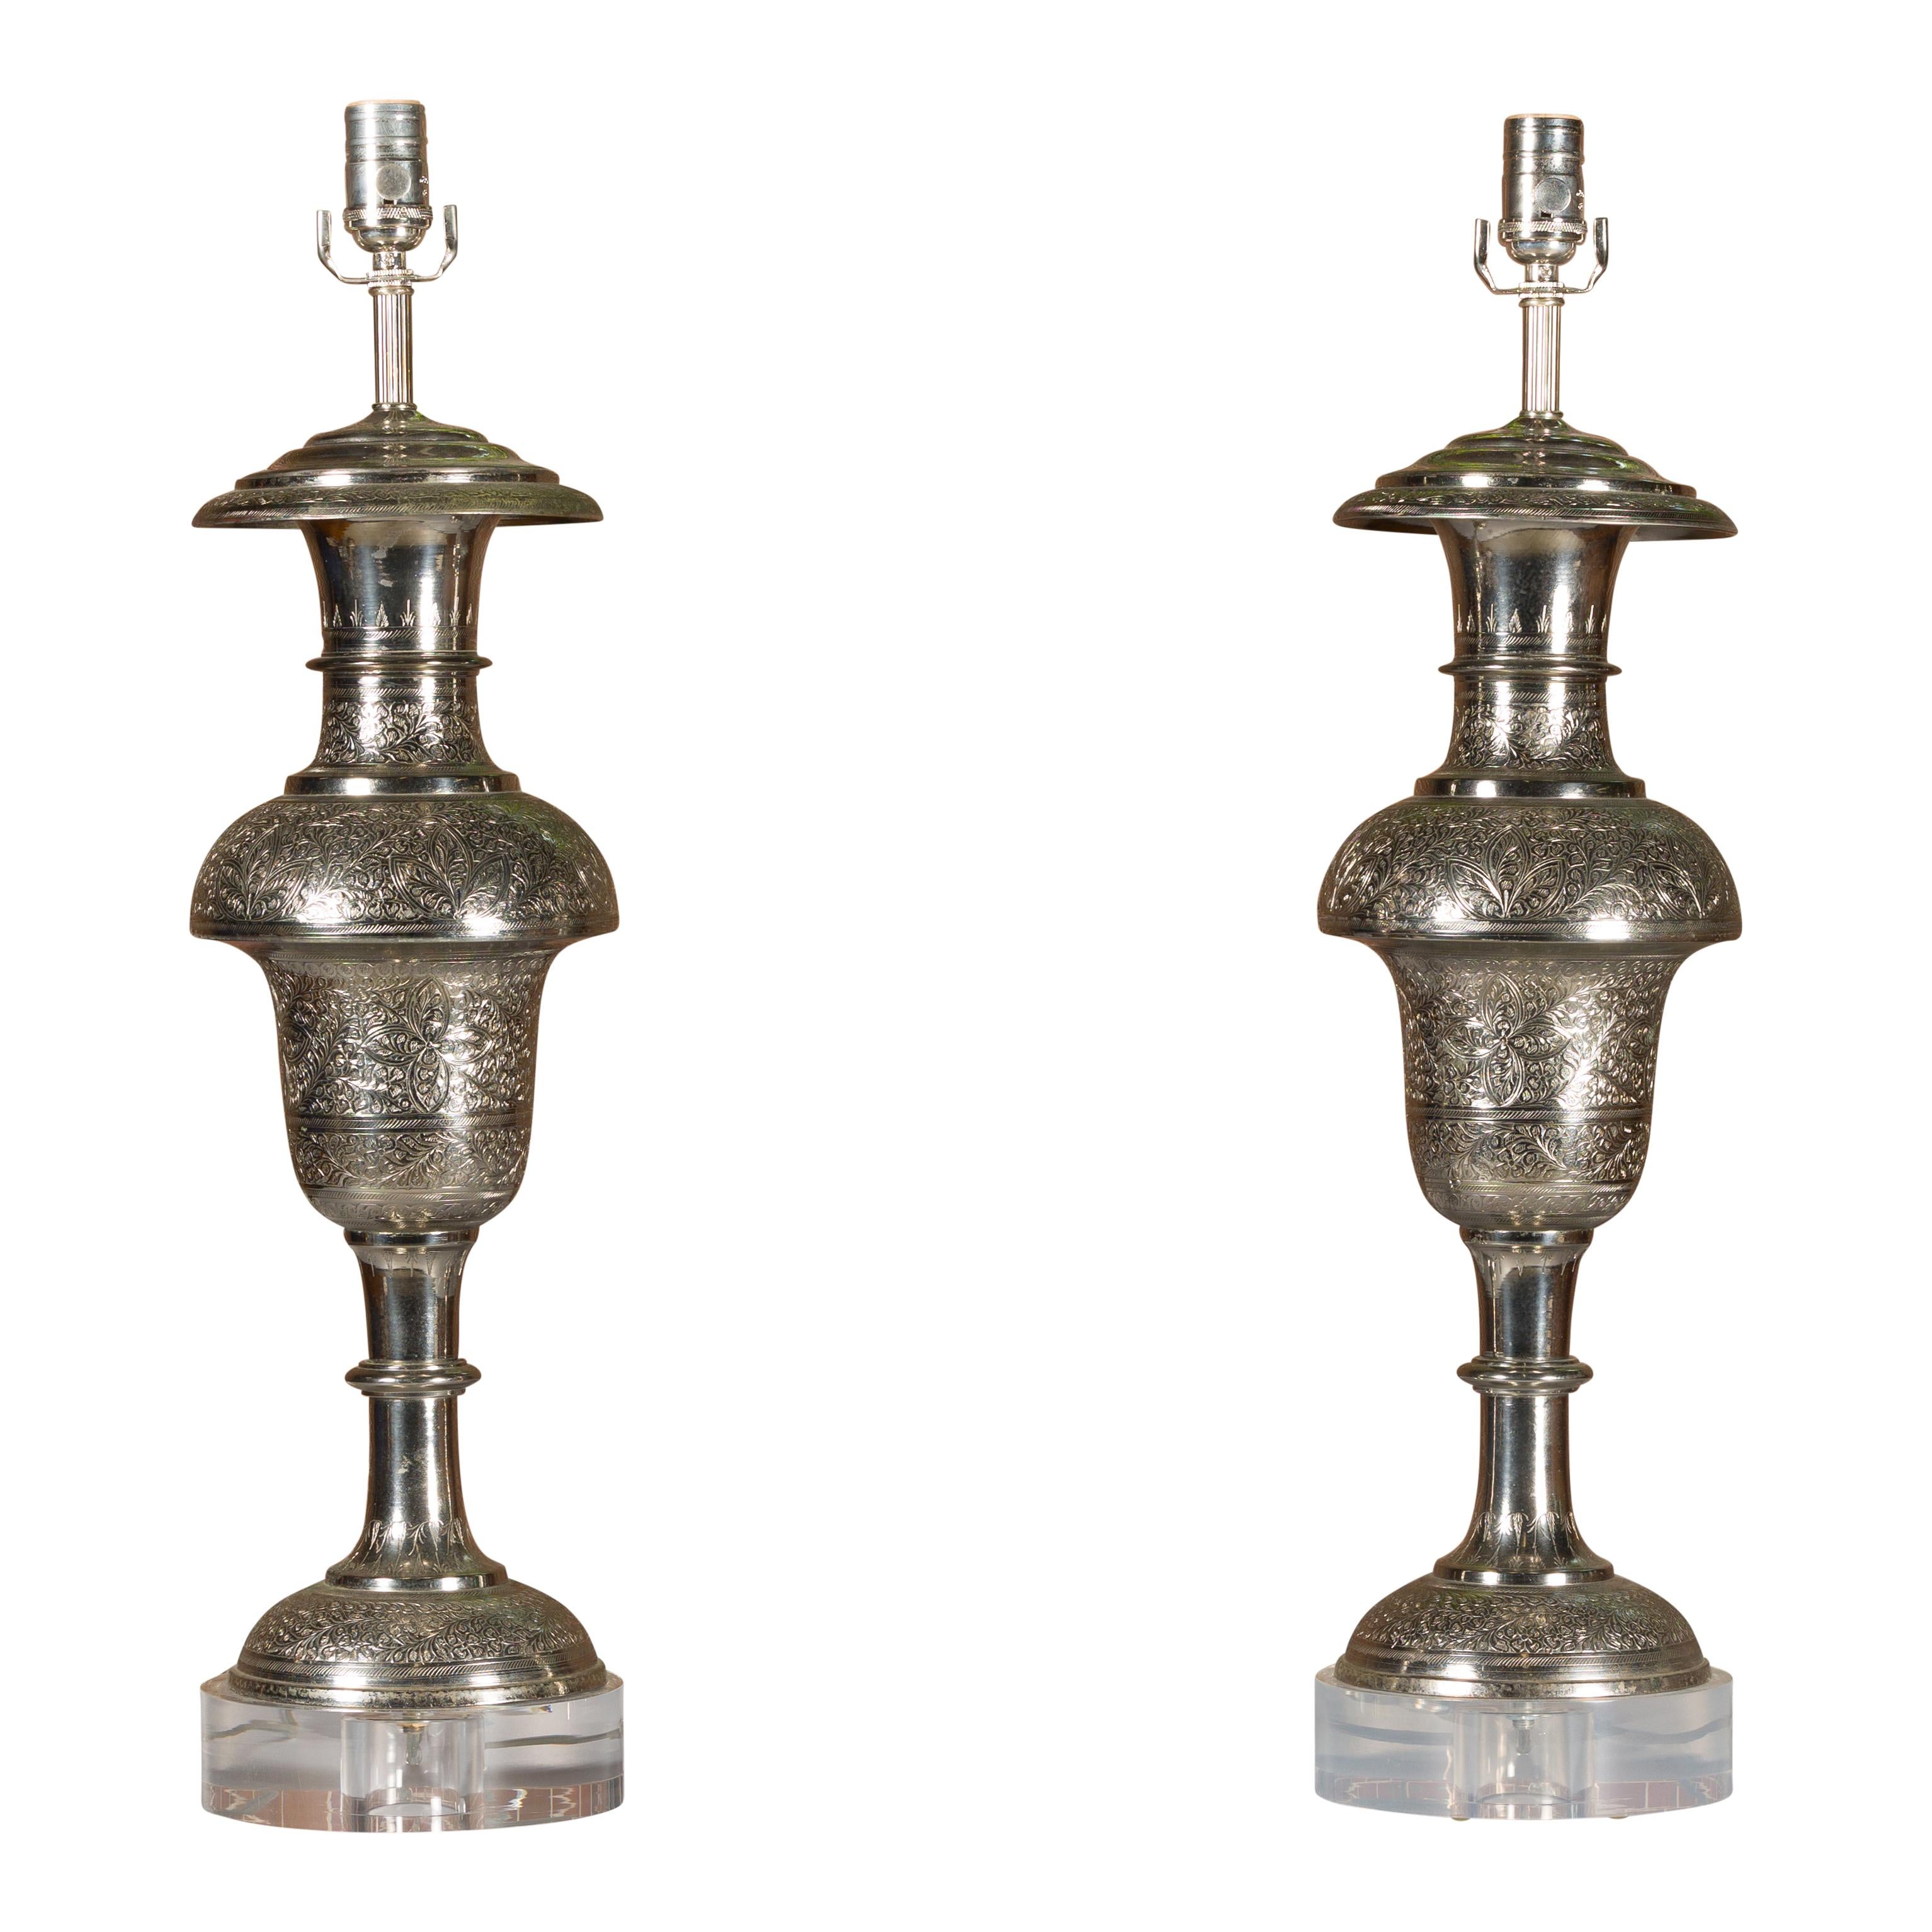 Pair of Moroccan Tôle Lamps on Lucite Bases with Etched Floral Décor, Midcentury For Sale 12